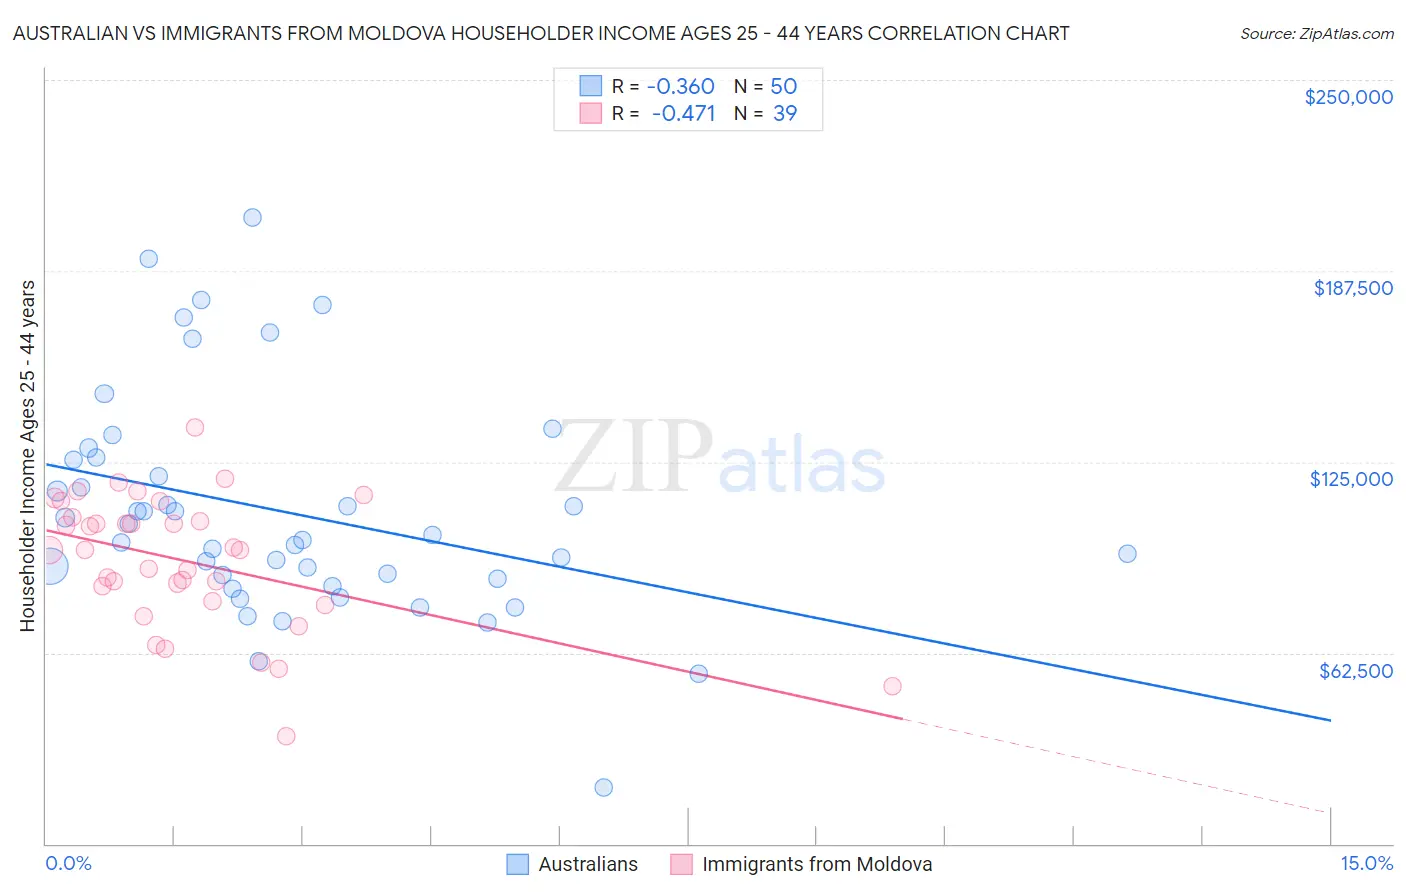 Australian vs Immigrants from Moldova Householder Income Ages 25 - 44 years